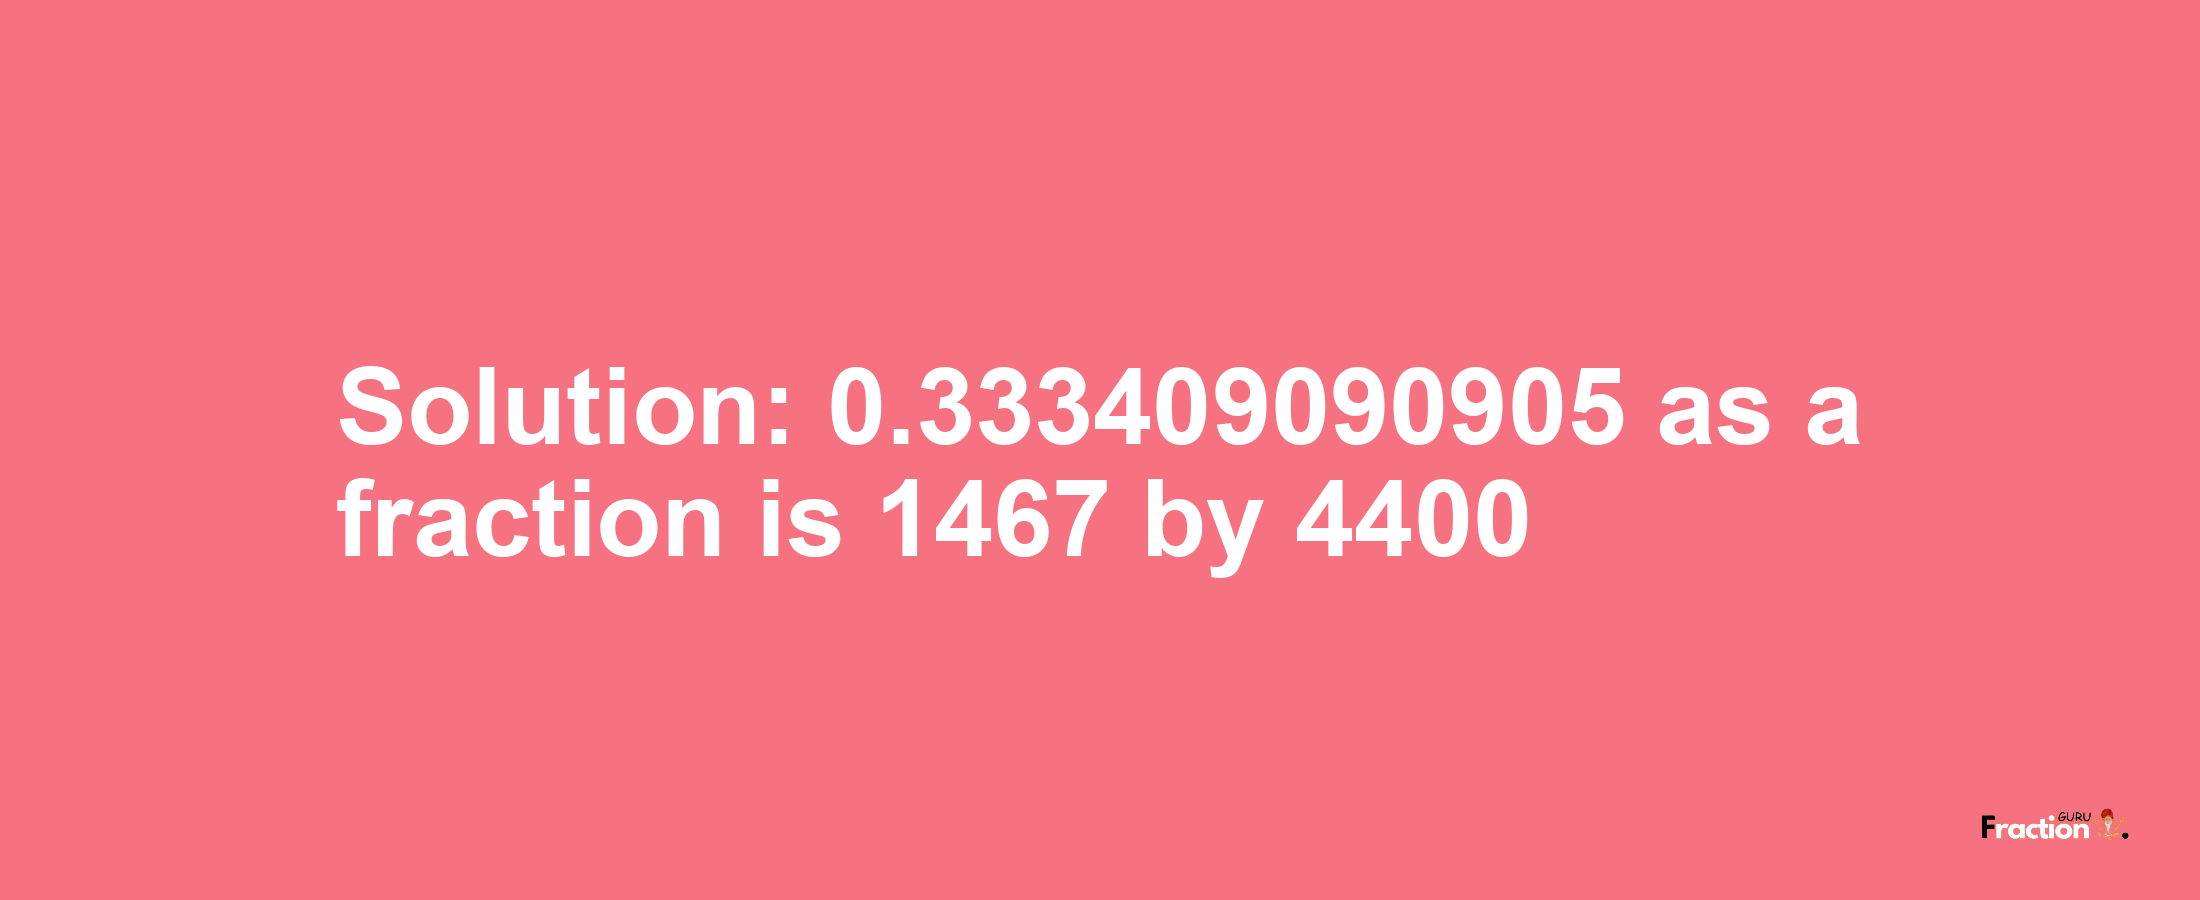 Solution:0.333409090905 as a fraction is 1467/4400